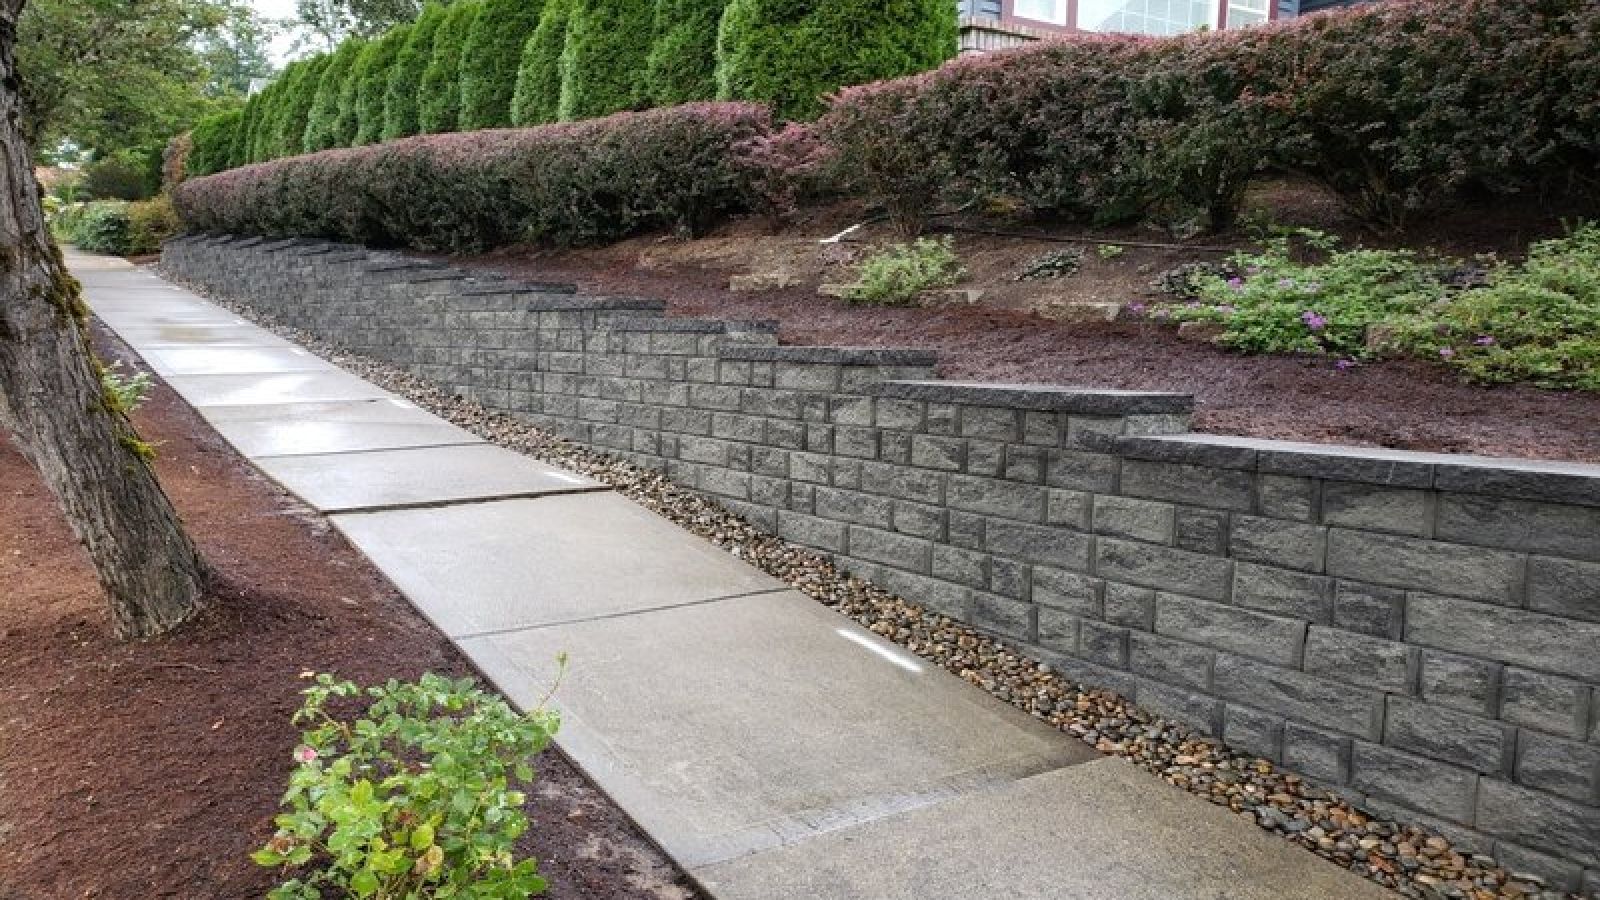 Harington® units by Keystone Hardscapes, available at AR Stoneworks & Outdoor Living, showcasing its naturally weathered stone design